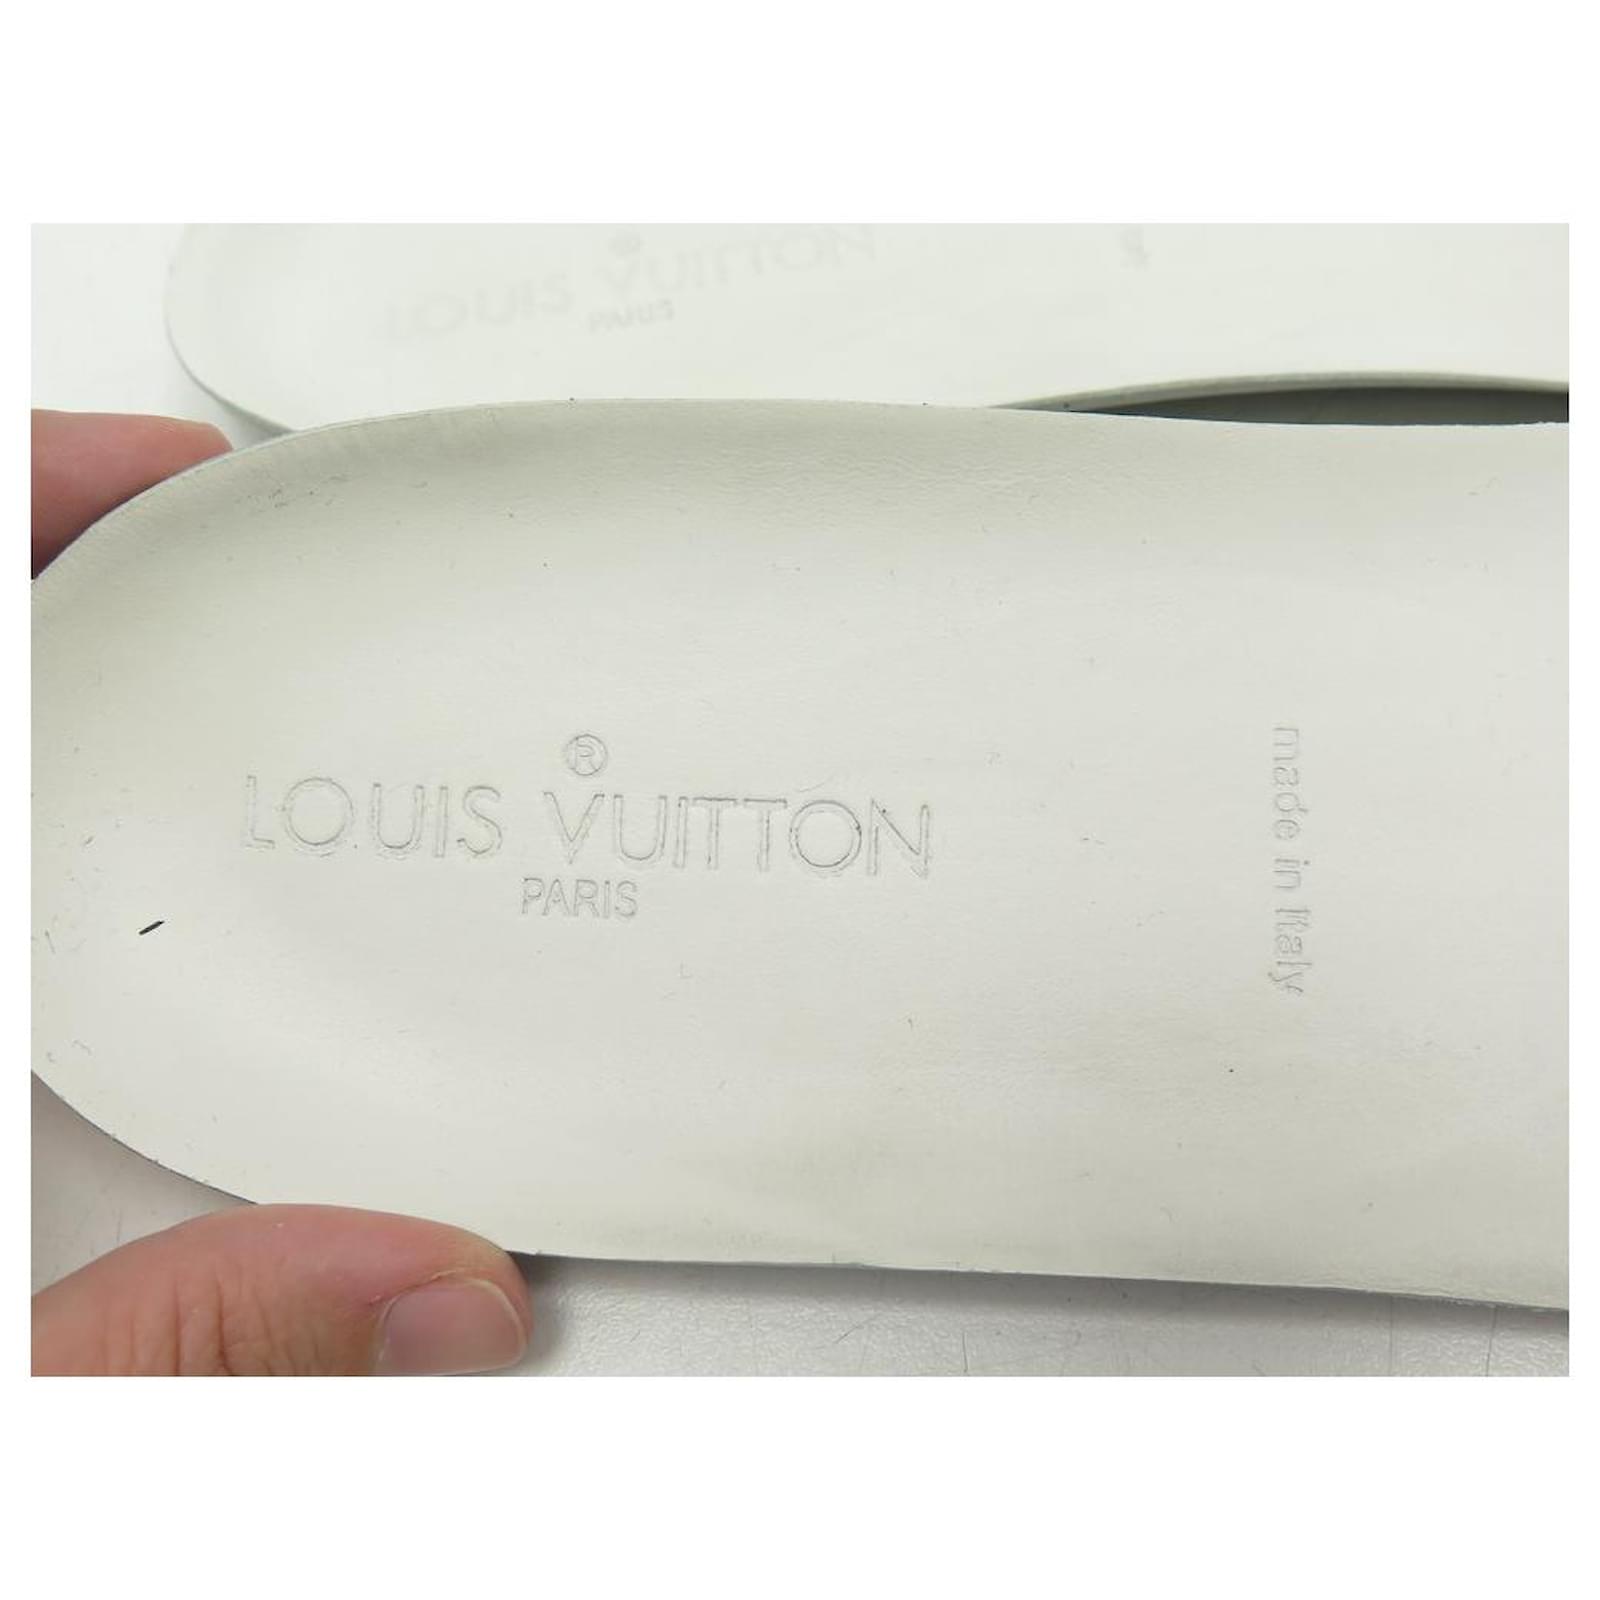 LOUIS VUITTON sneakers SHOES 11 45 IN BLUE CANVAS & SUEDE SNEAKERS